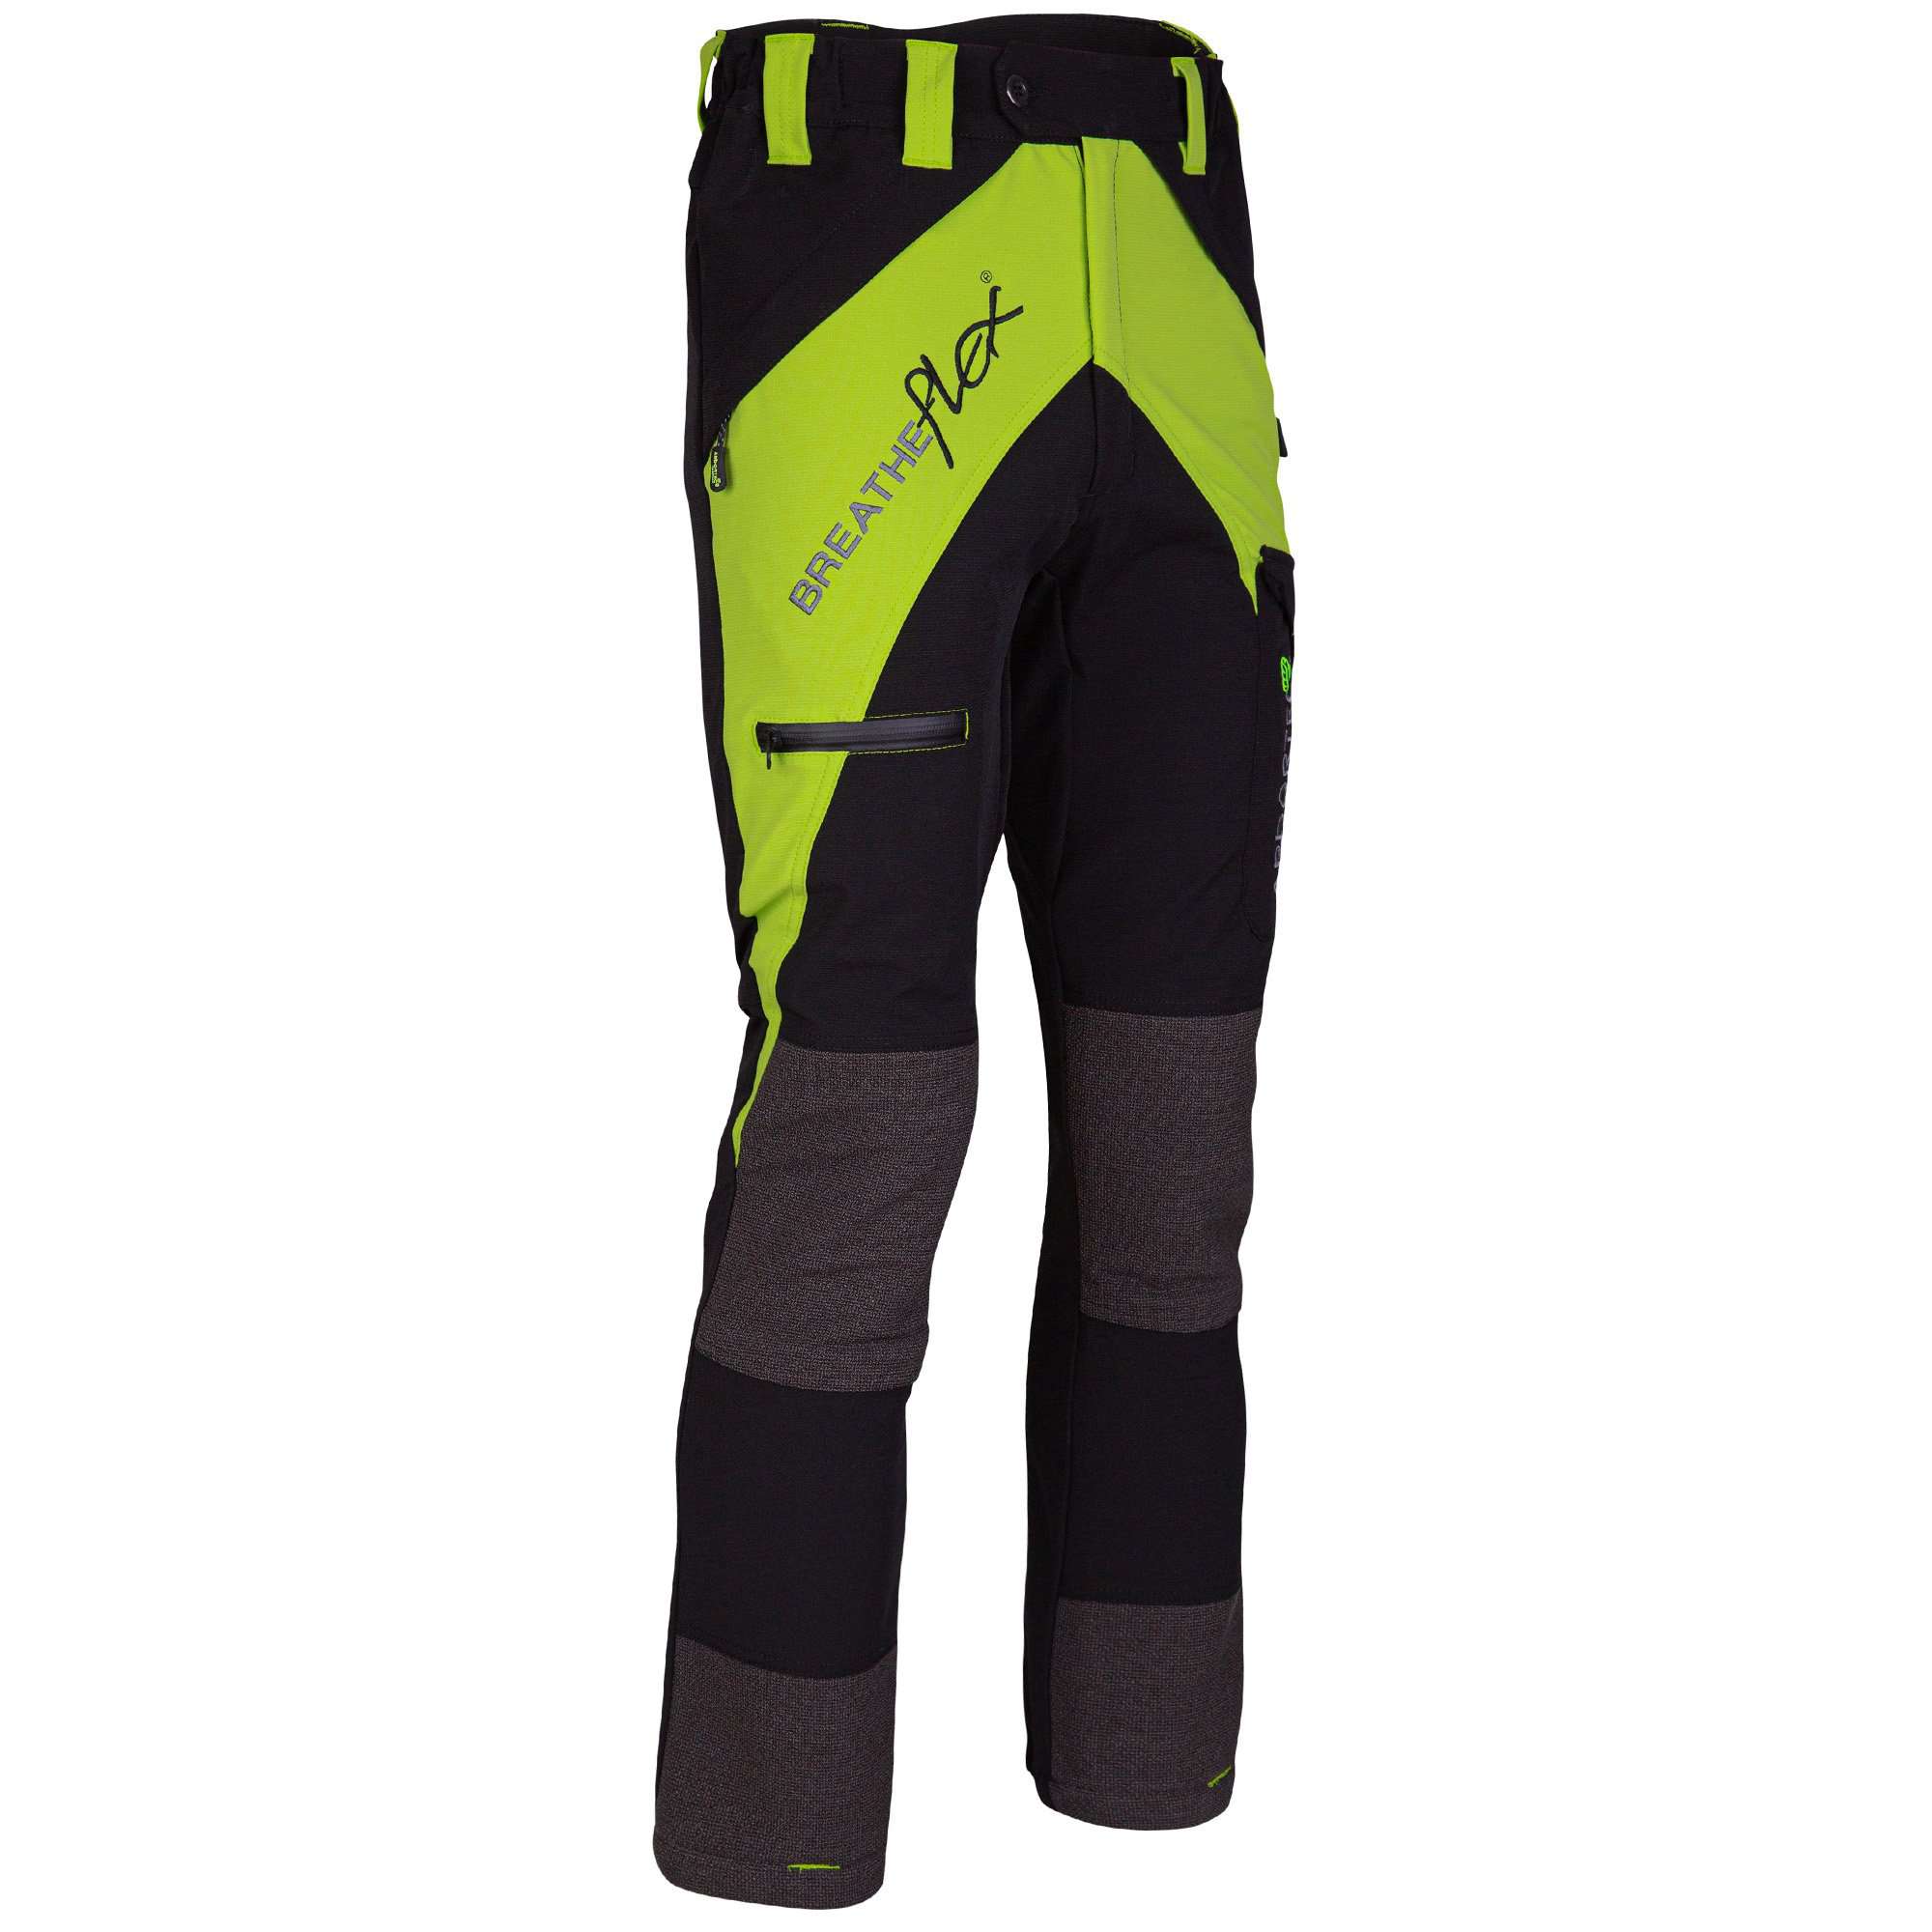 AT4110 Breatheflex Non-Protective Trousers - Lime - Arbortec Forestwear